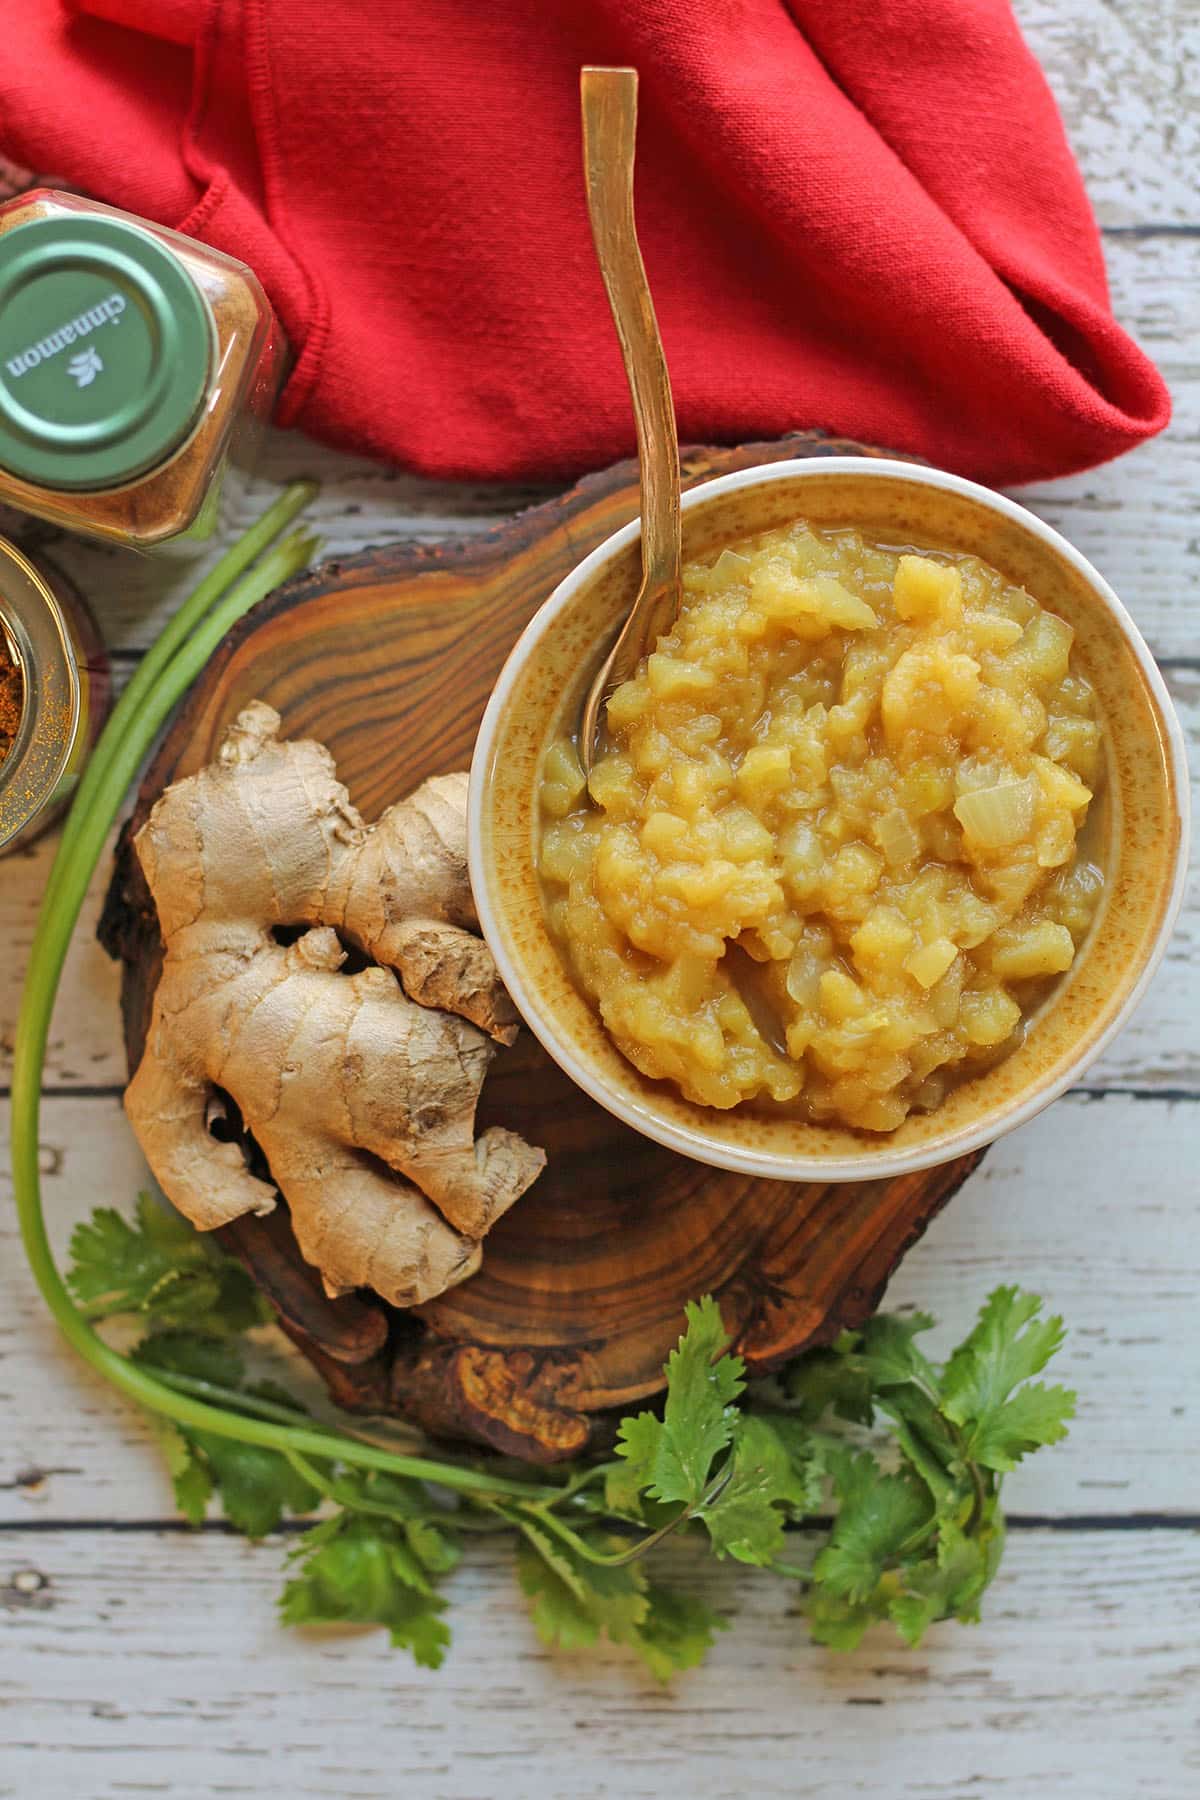 Apple chutney in a yellow bowl by cilantro, cinnamon, and ginger.